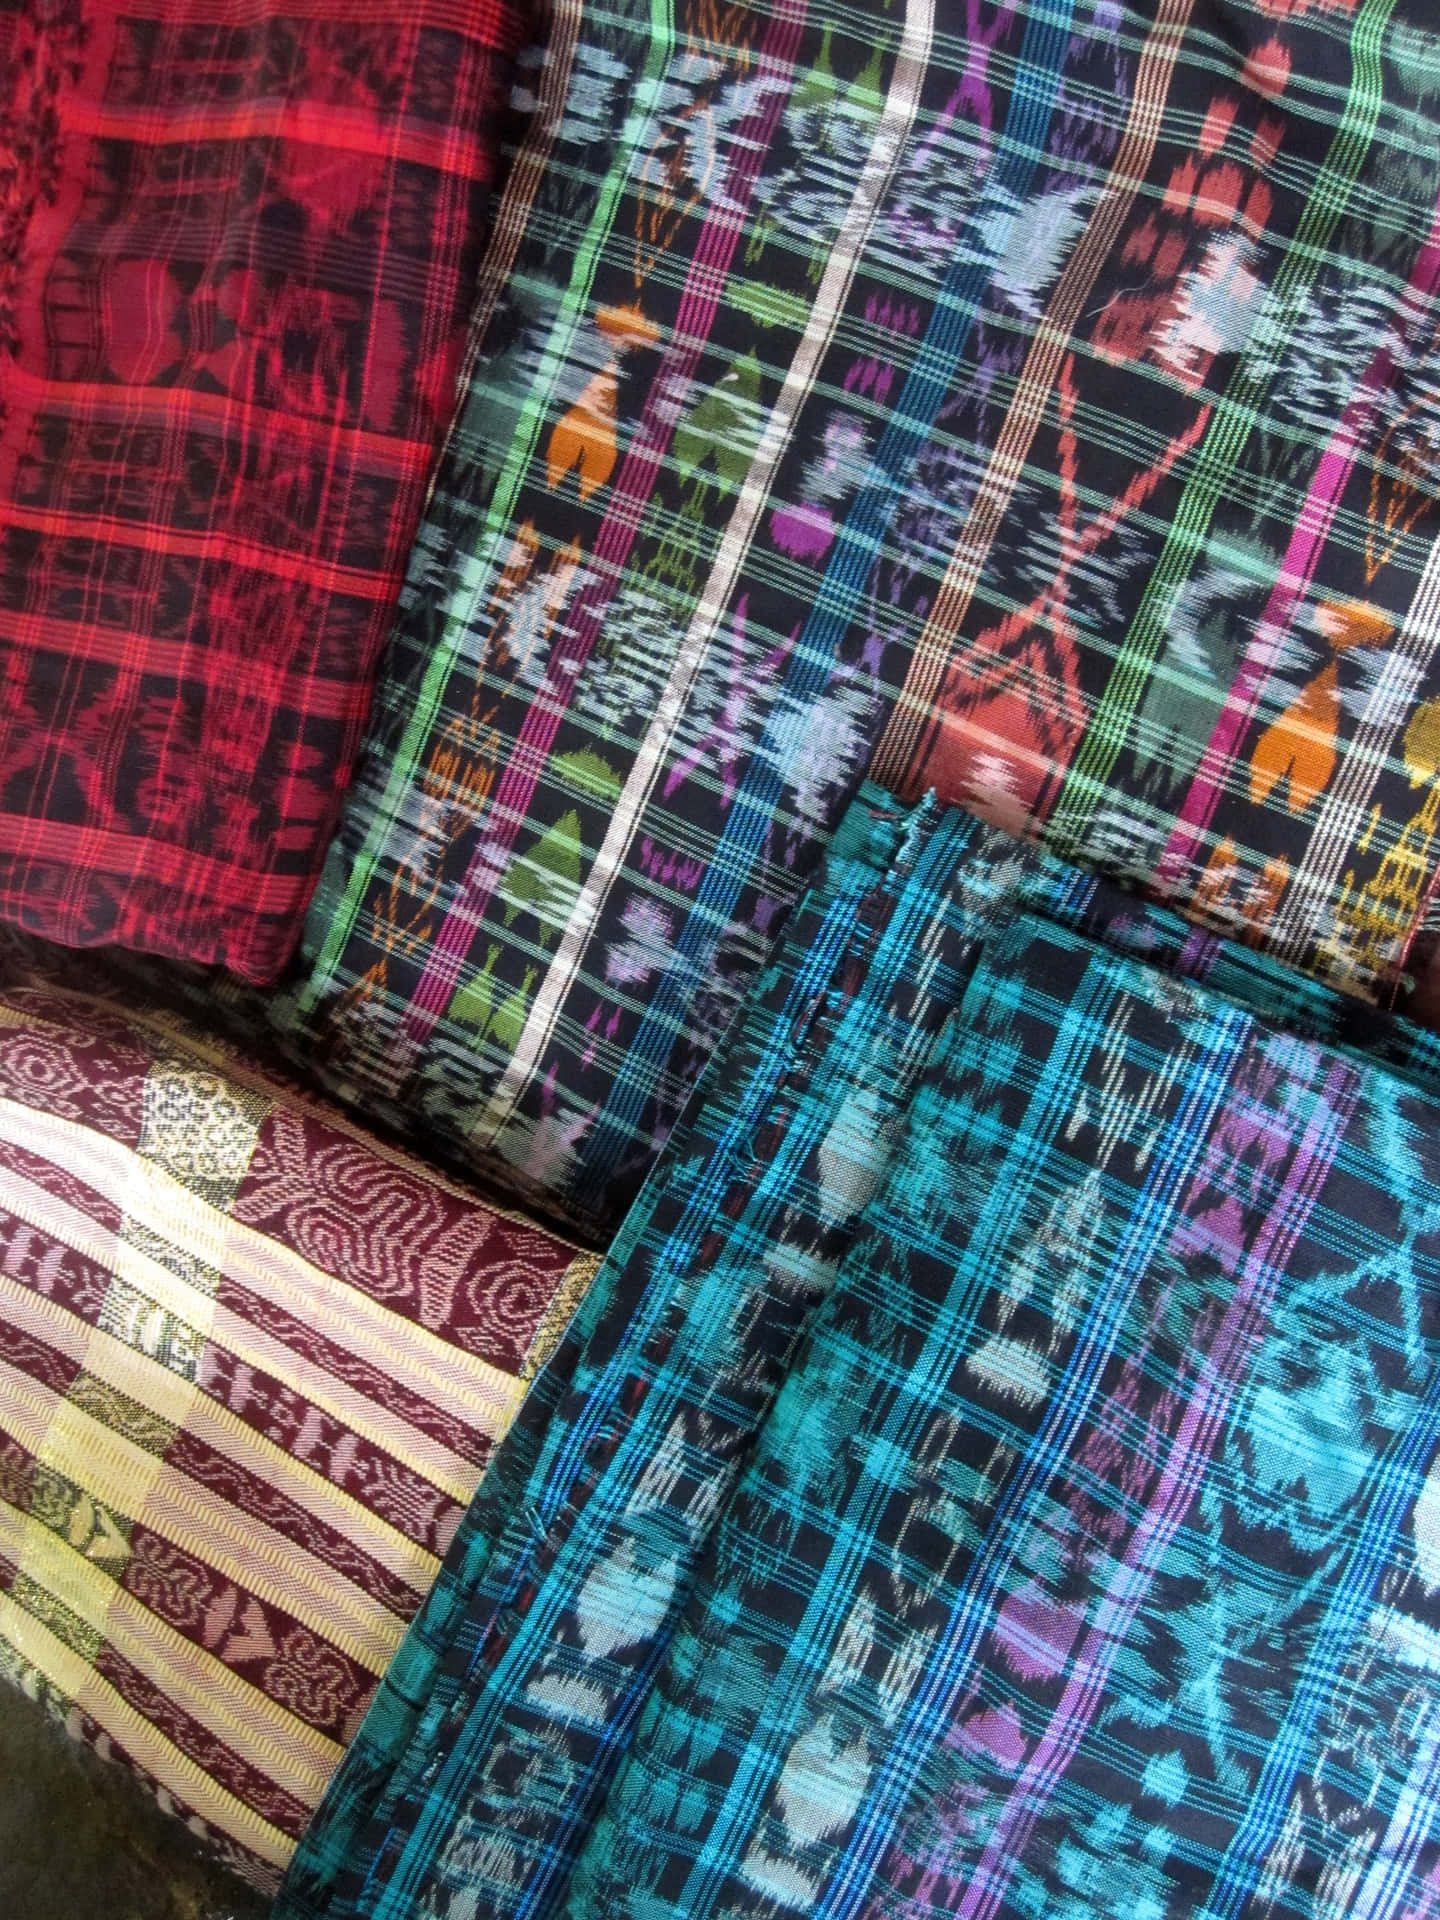 A Group Of Colorful Patterned Bags Are Stacked On Top Of Each Other Wallpaper